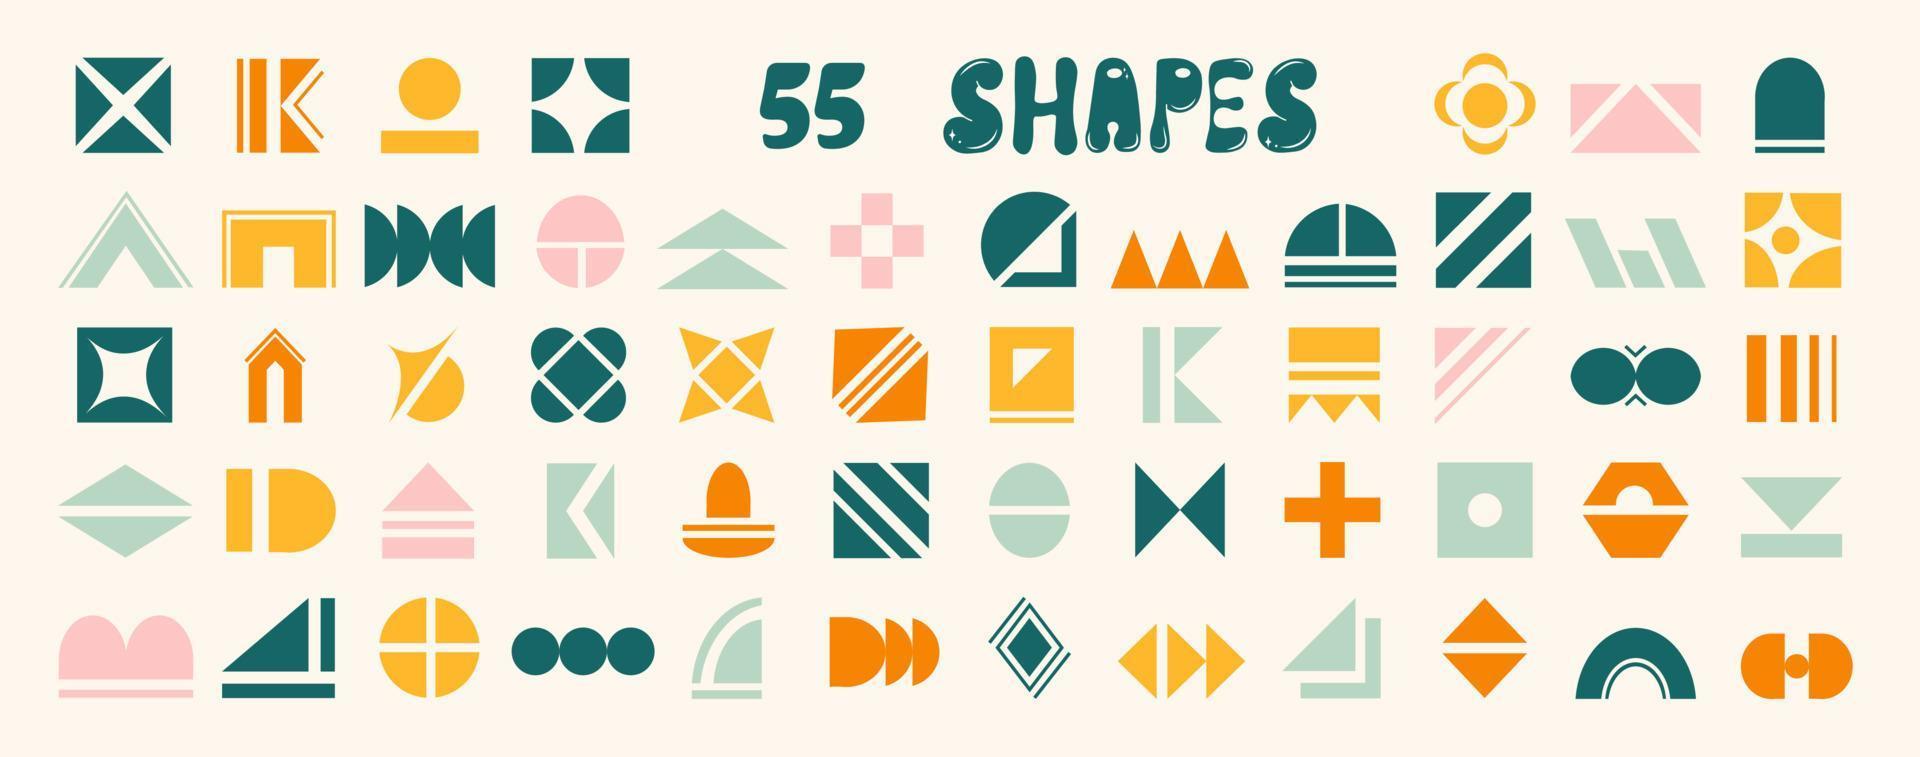 Set of simple geometric shapes. Random icon elements. For creating your own patterns and designs. vector